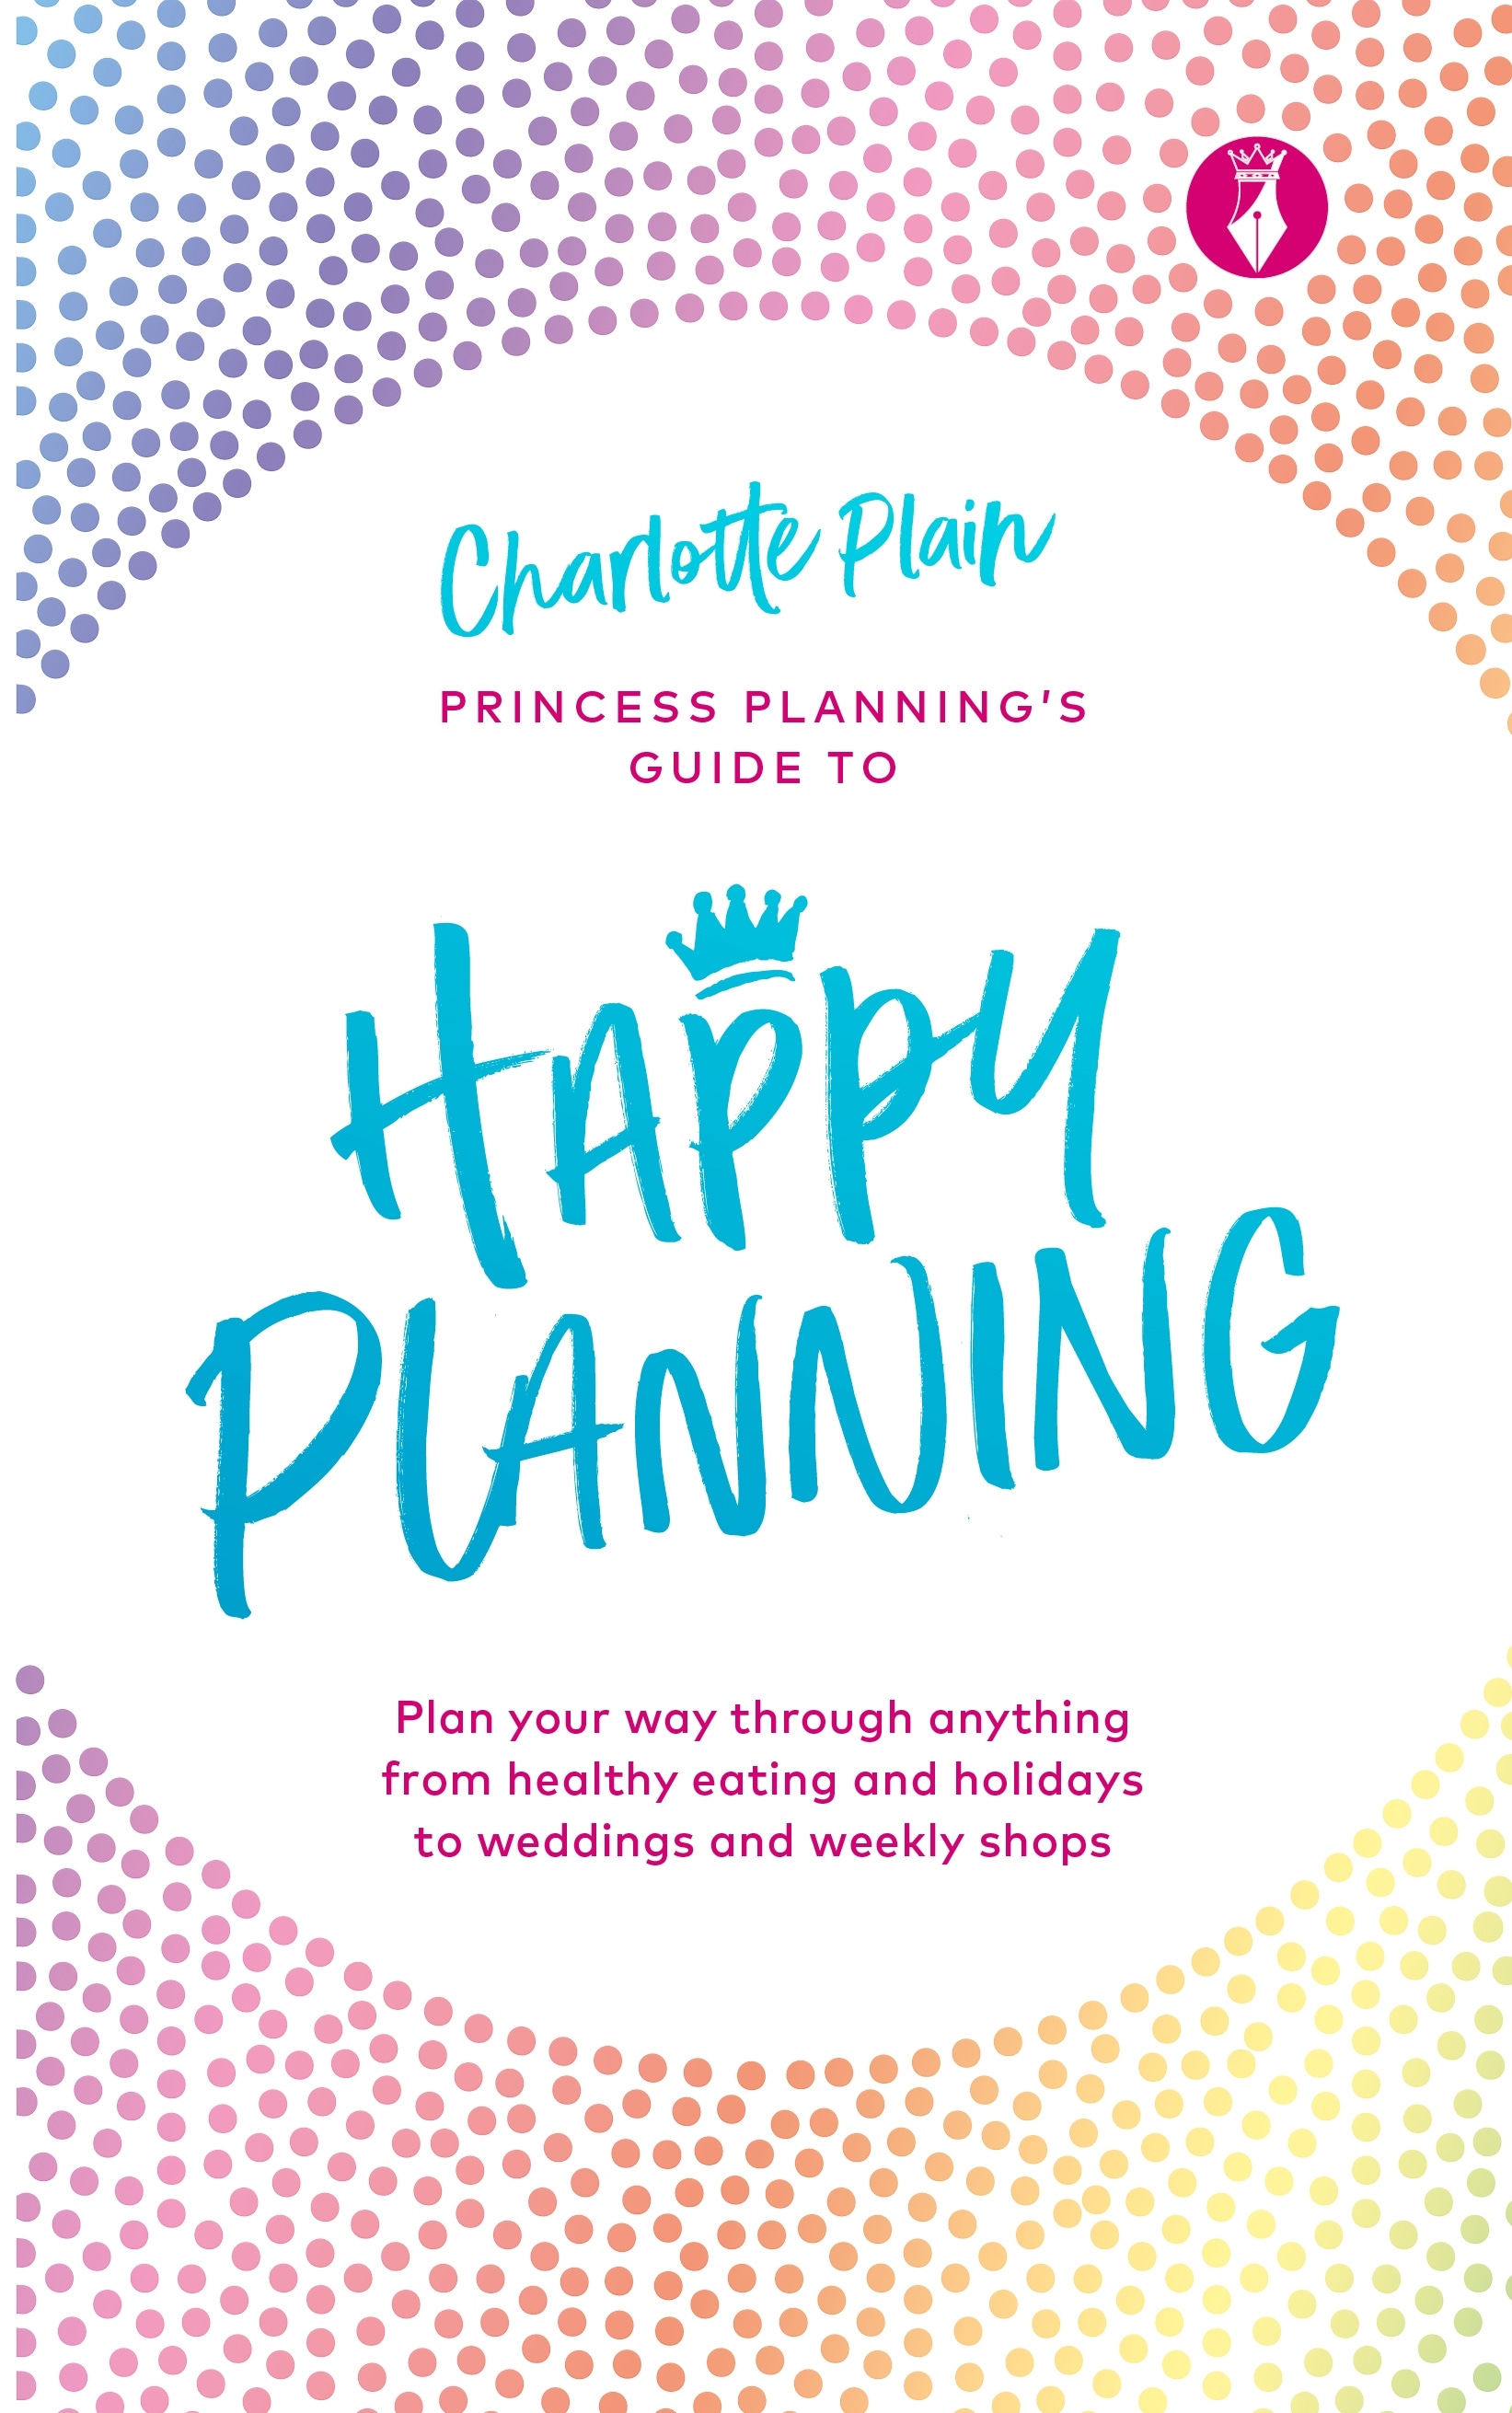 Book “Happy Planning” by Charlotte Plain — January 7, 2021